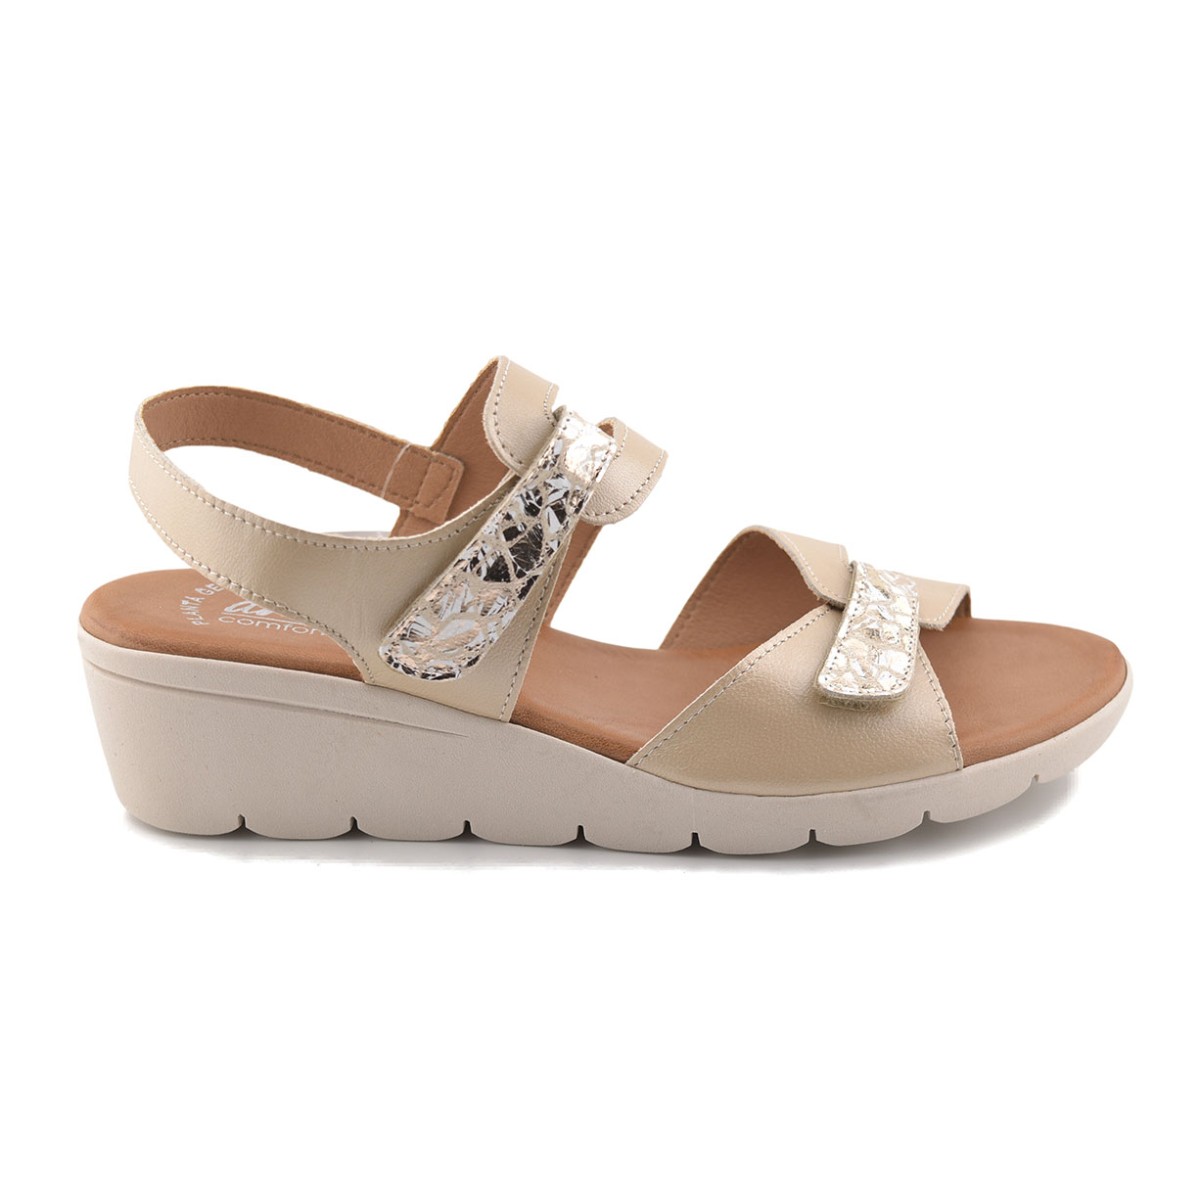 Beige wedge leather sandals by Amelie